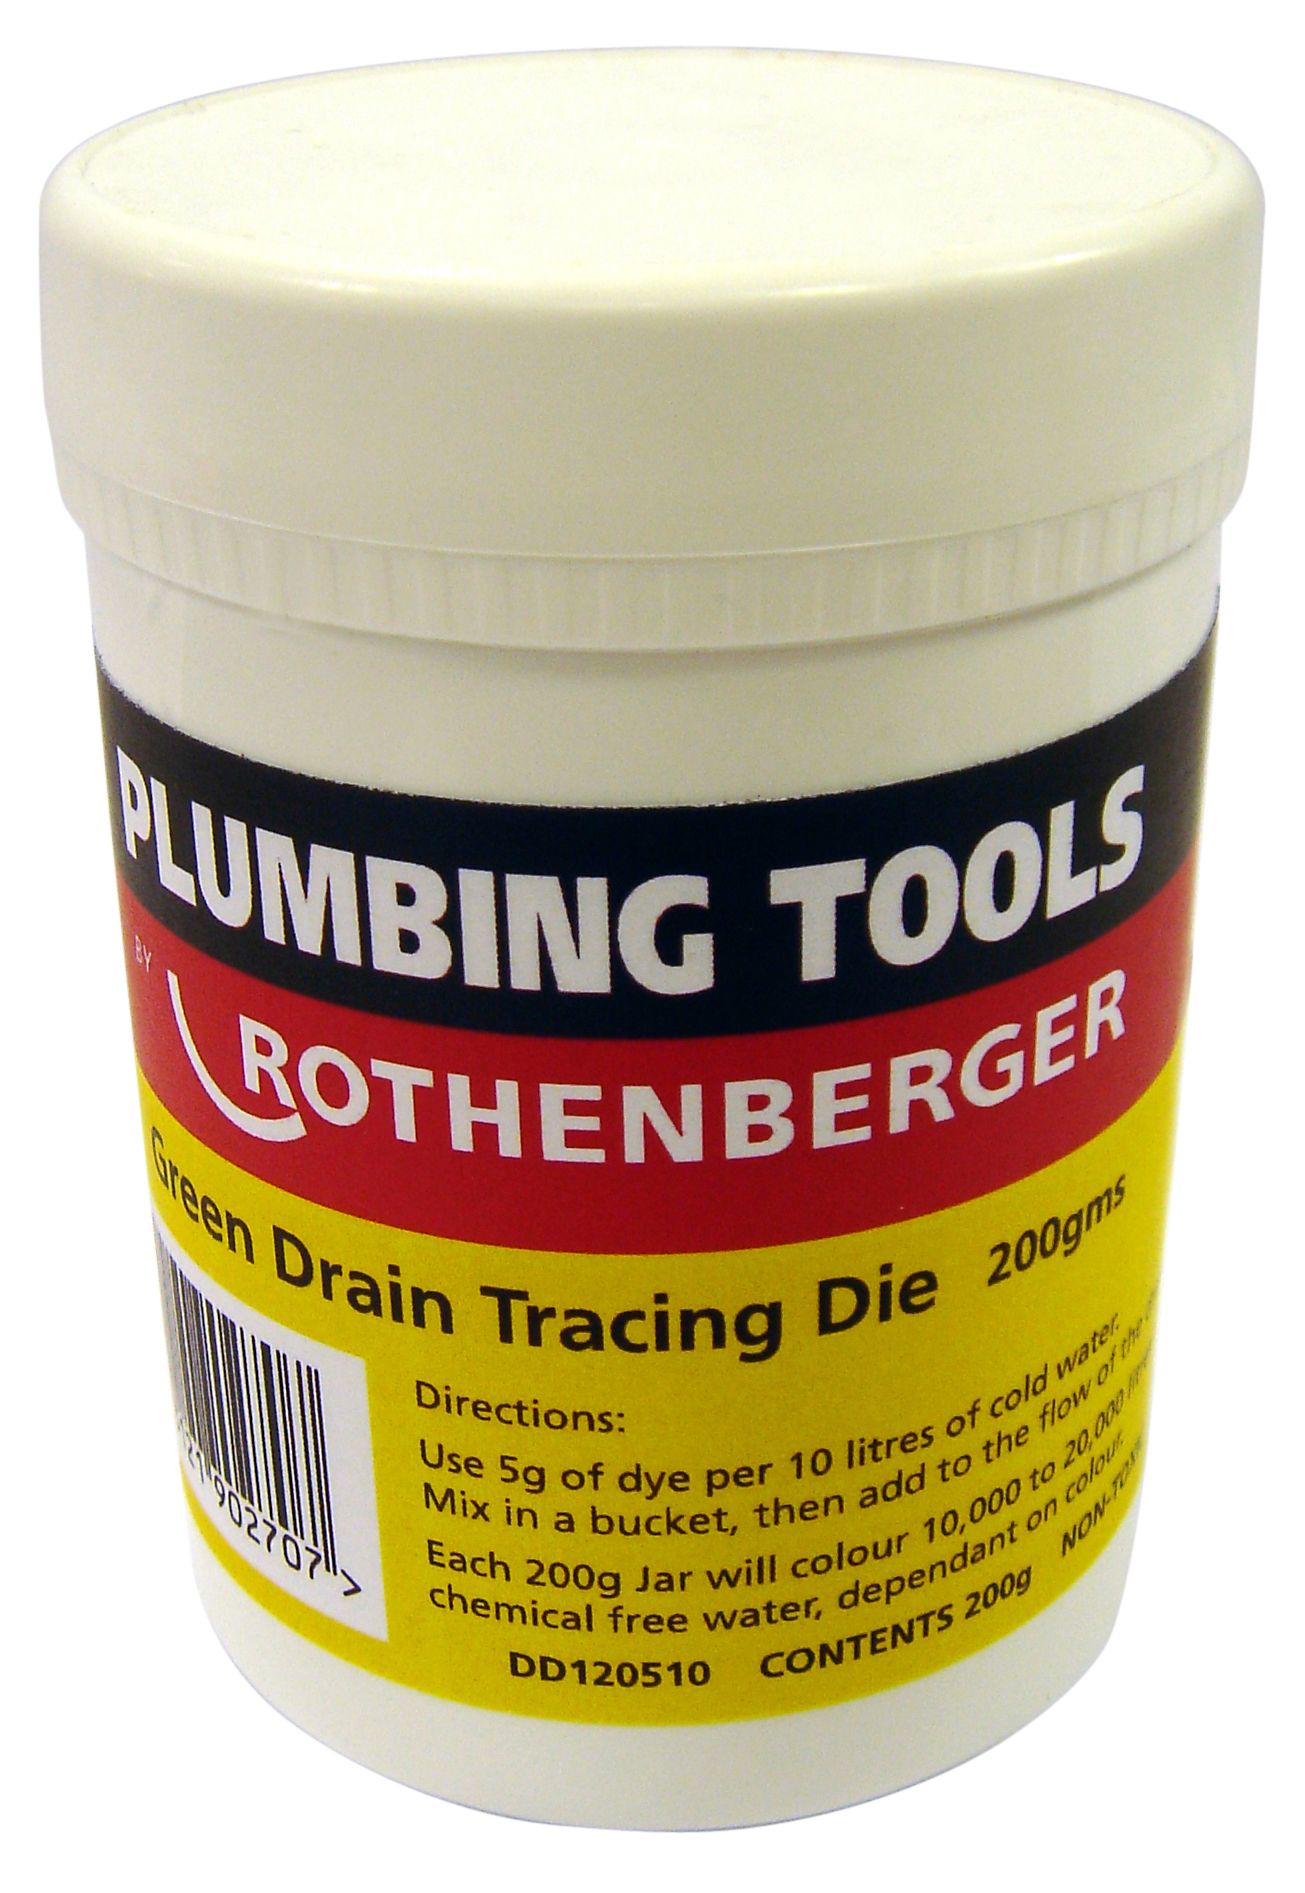 Rothenberger White Drain tracing dye, 200g